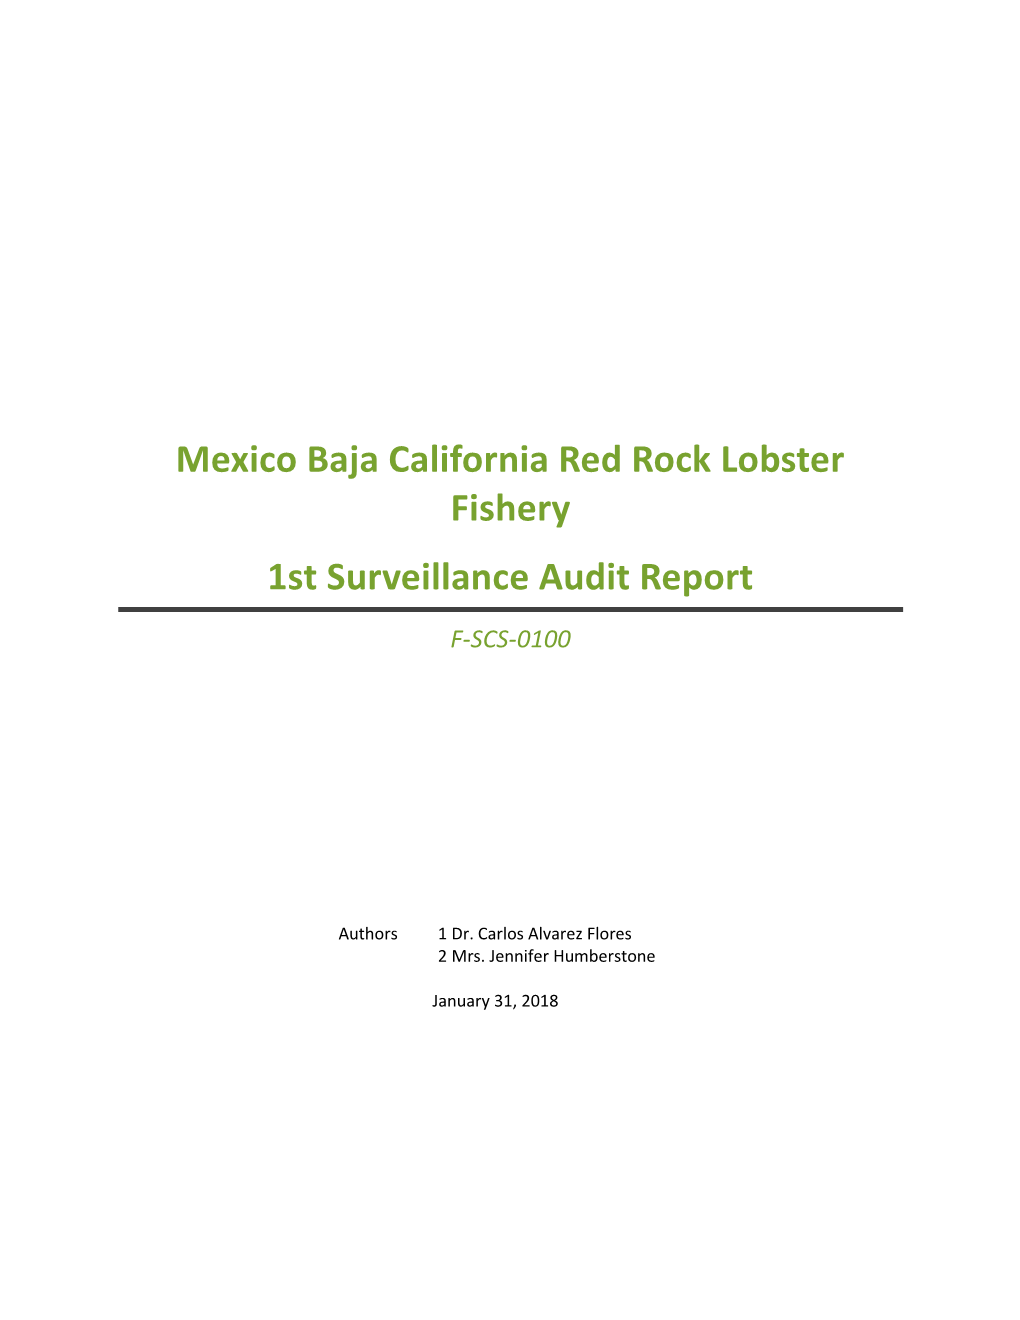 Mexico Baja California Red Rock Lobster Fishery 1St Surveillance Audit Report